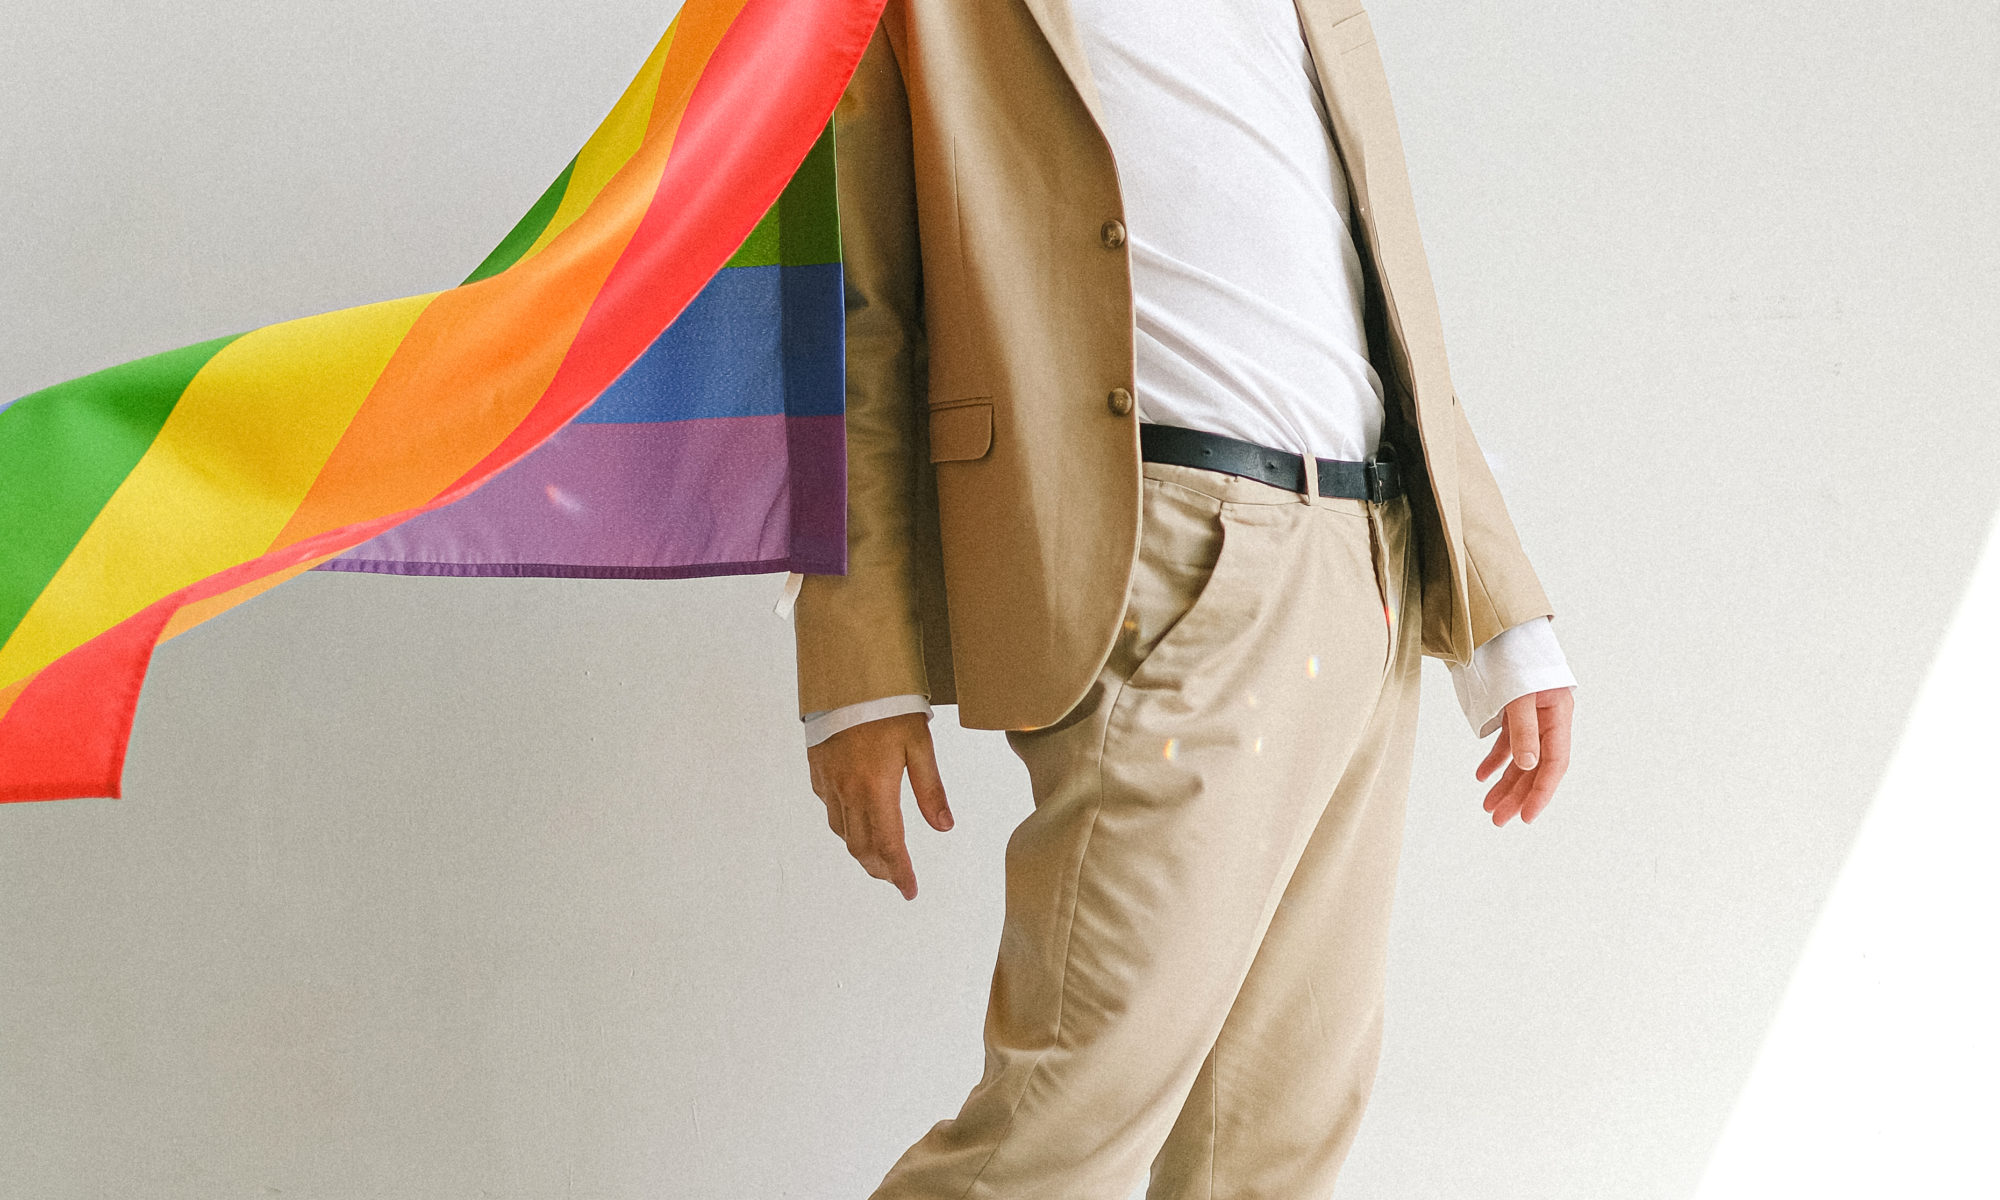 Man with a gay pride flag